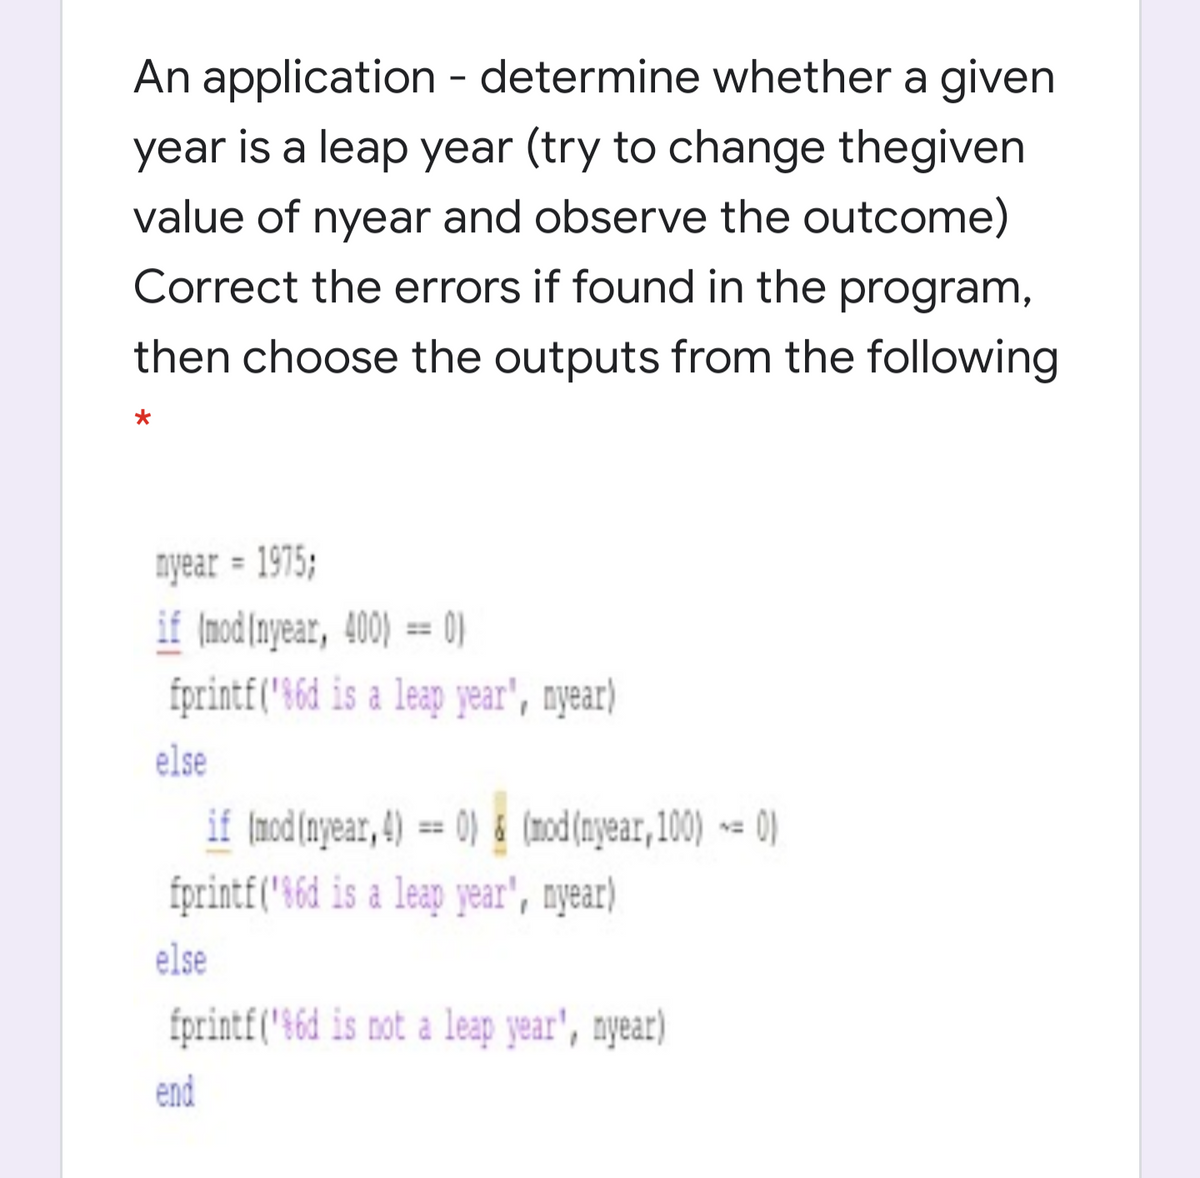 An application - determine whether a given
year is a leap year (try to change thegiven
value of nyear and observe the outcome)
Correct the errors if found in the program,
then choose the outputs from the following
nyear = 1975;
if (nod(nyear, 400) == 0)
fprint£("$6d is a leap year', nyear)
%3D
else
if Imod(nyear, 4) == 0) & (mod(ayear, 100) -= 0)
fprintf('16d is a leap year', nyear)
else
fprintf("$6d is not a leap year', nyear)
end
